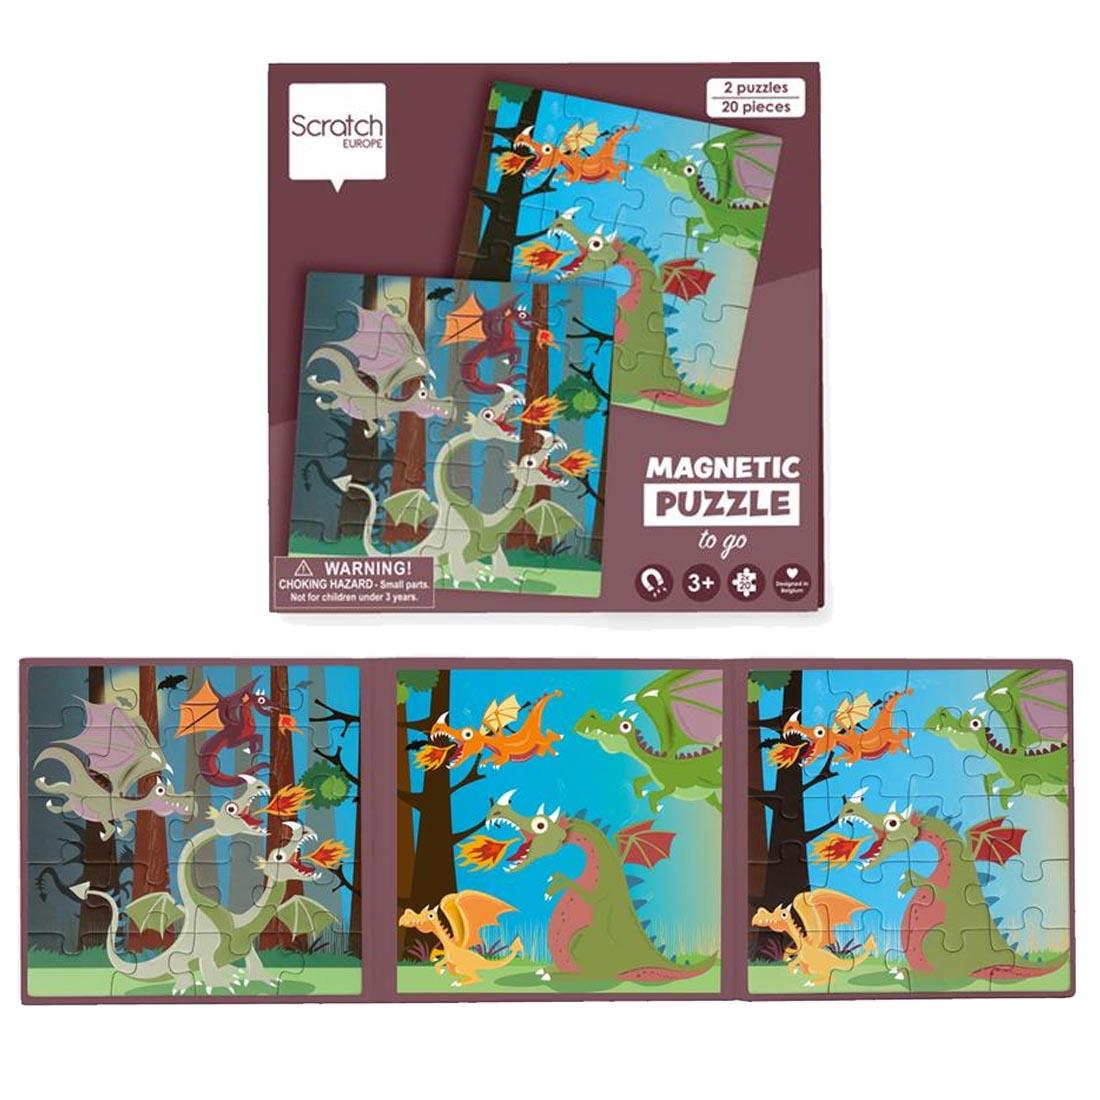 Dragons Magnetic Puzzles To Go both in package and opened